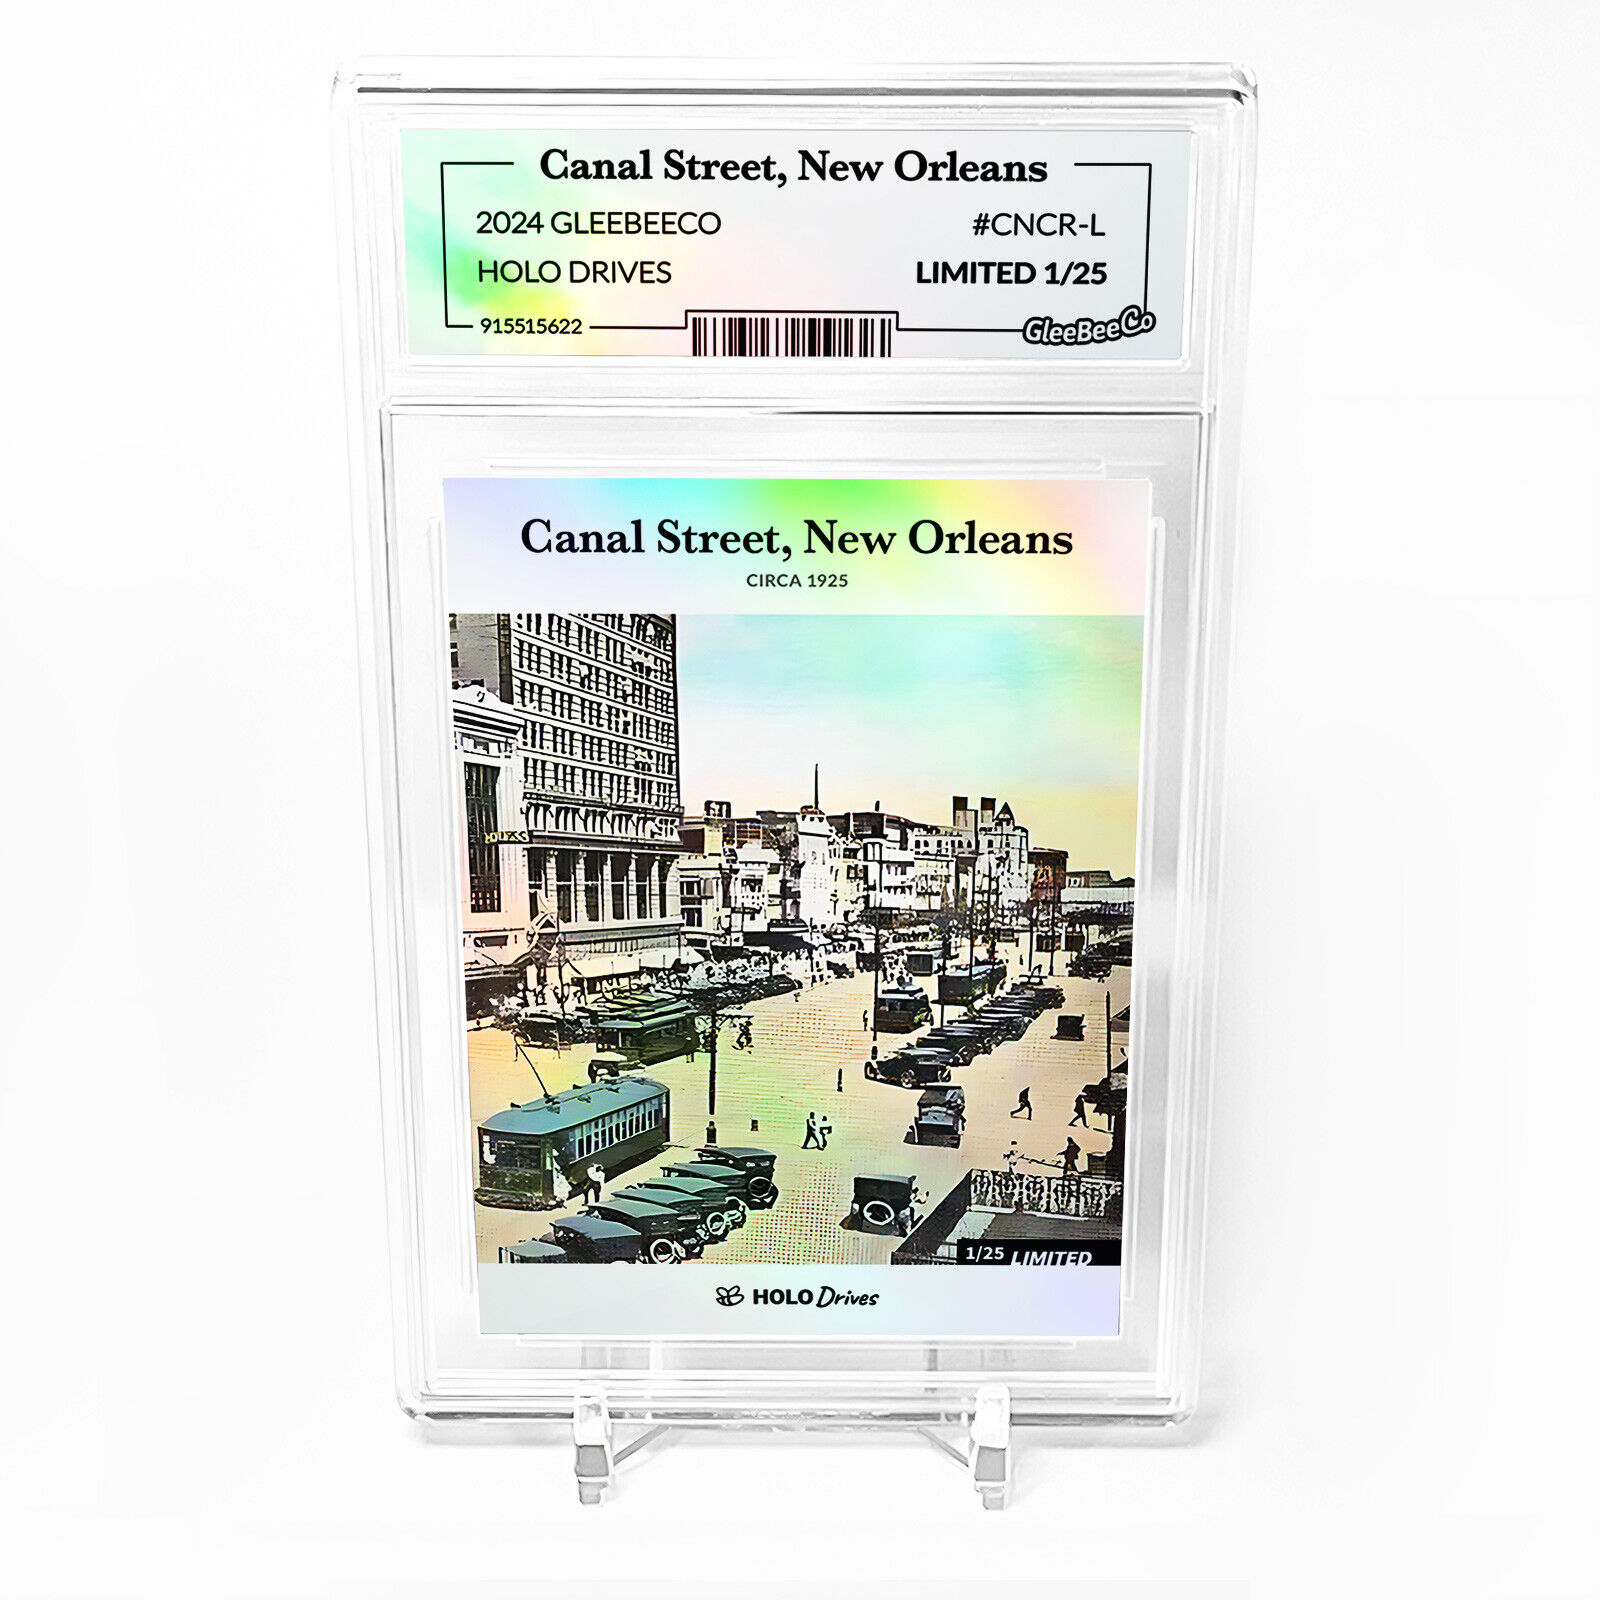 CANAL STREET, NEW ORLEANS Card 2024 GleeBeeCo Holo #CNCR-L - Limited Edition /25